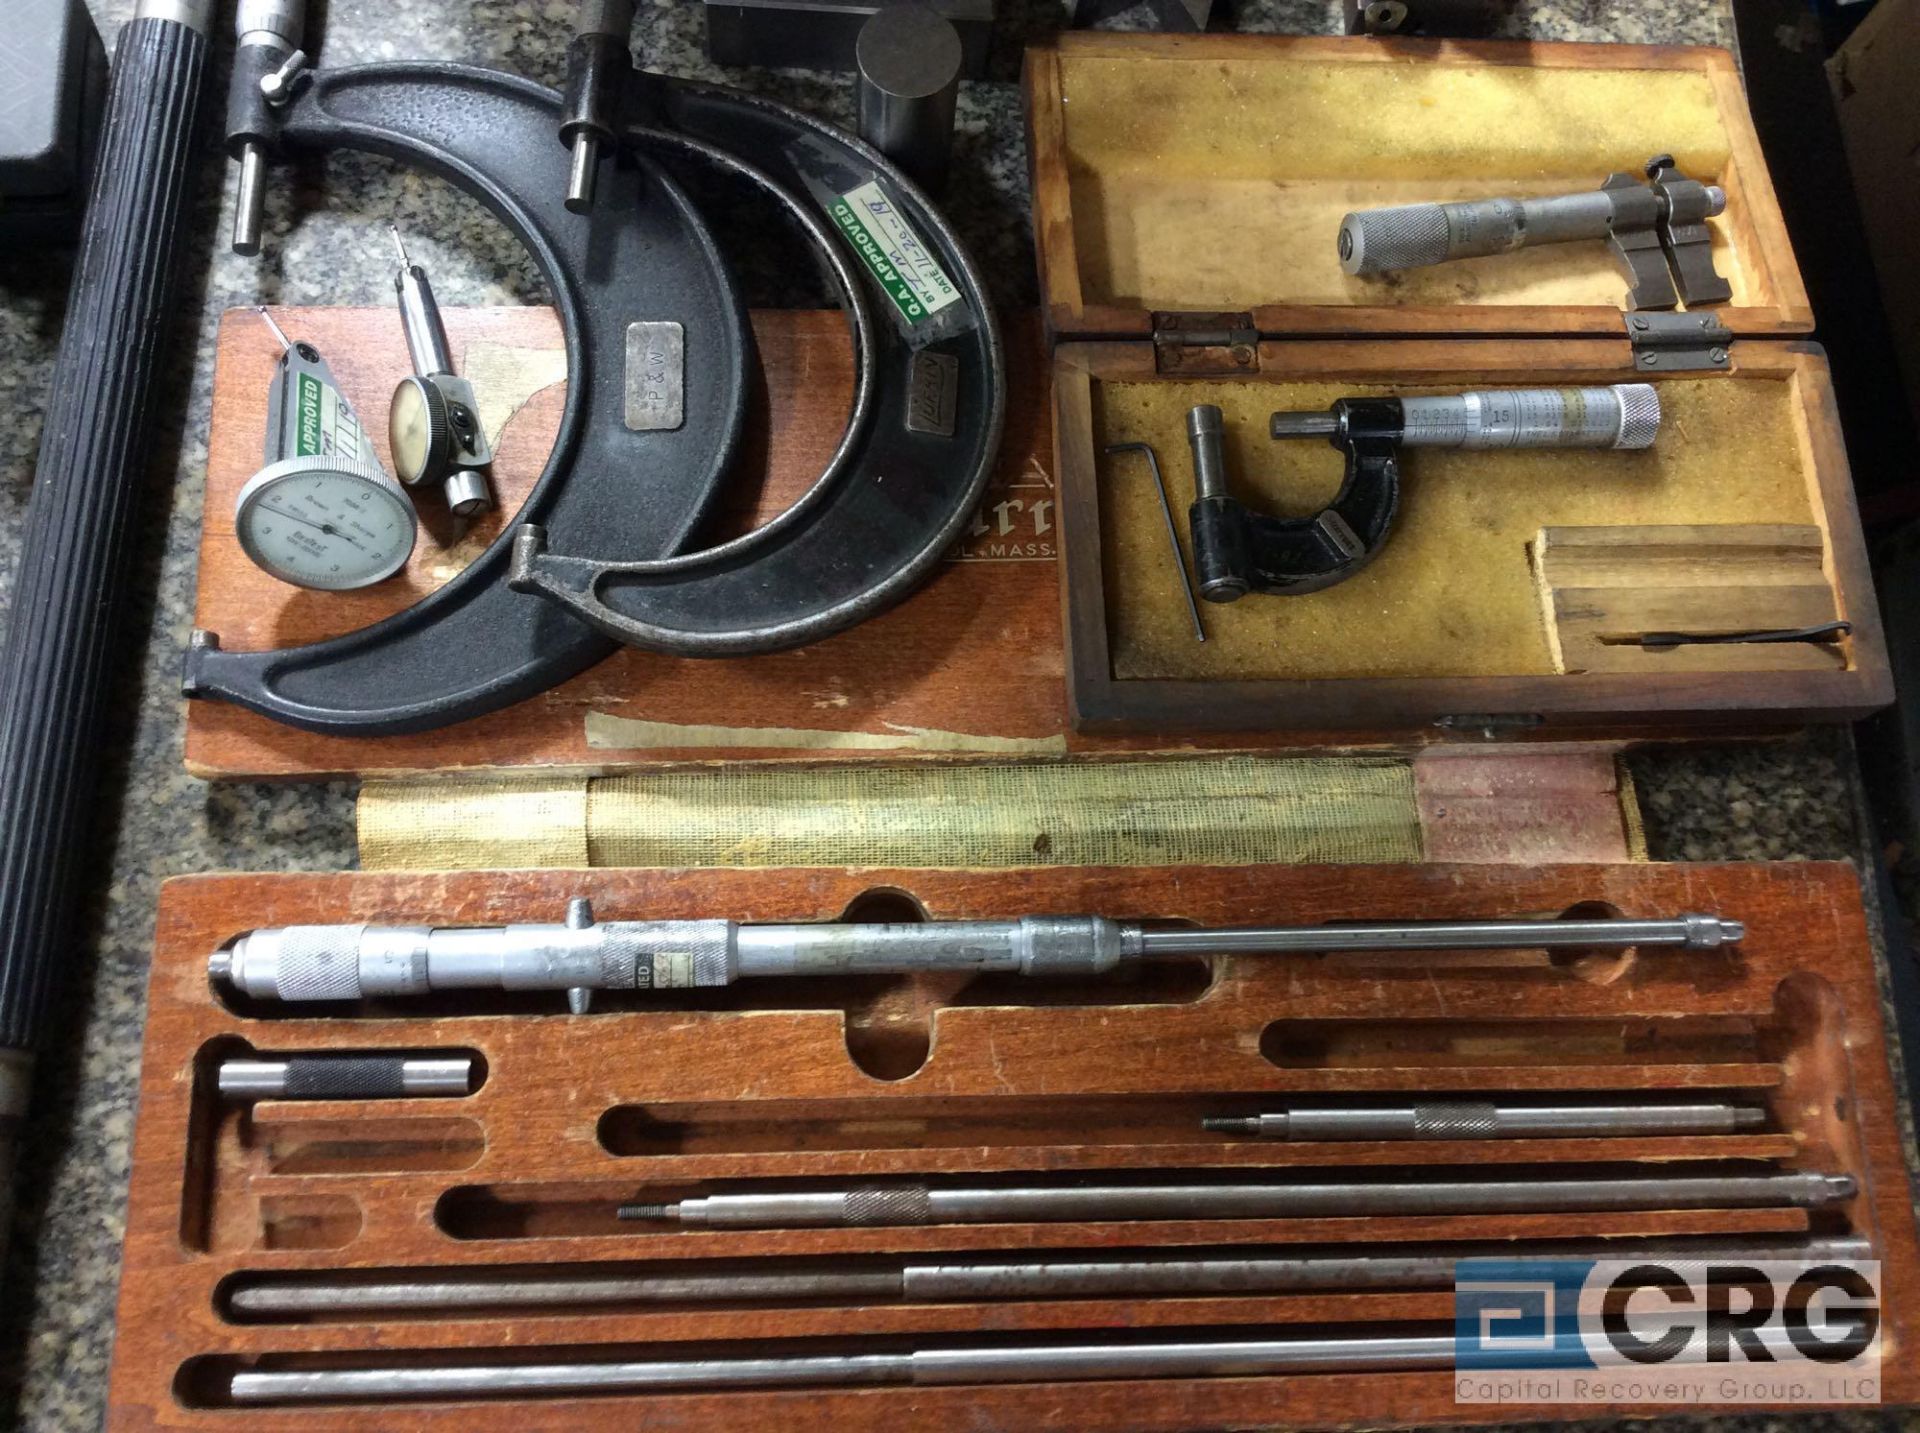 Lot of assorted Inspection, measuring and testing devices etc. - Image 3 of 10